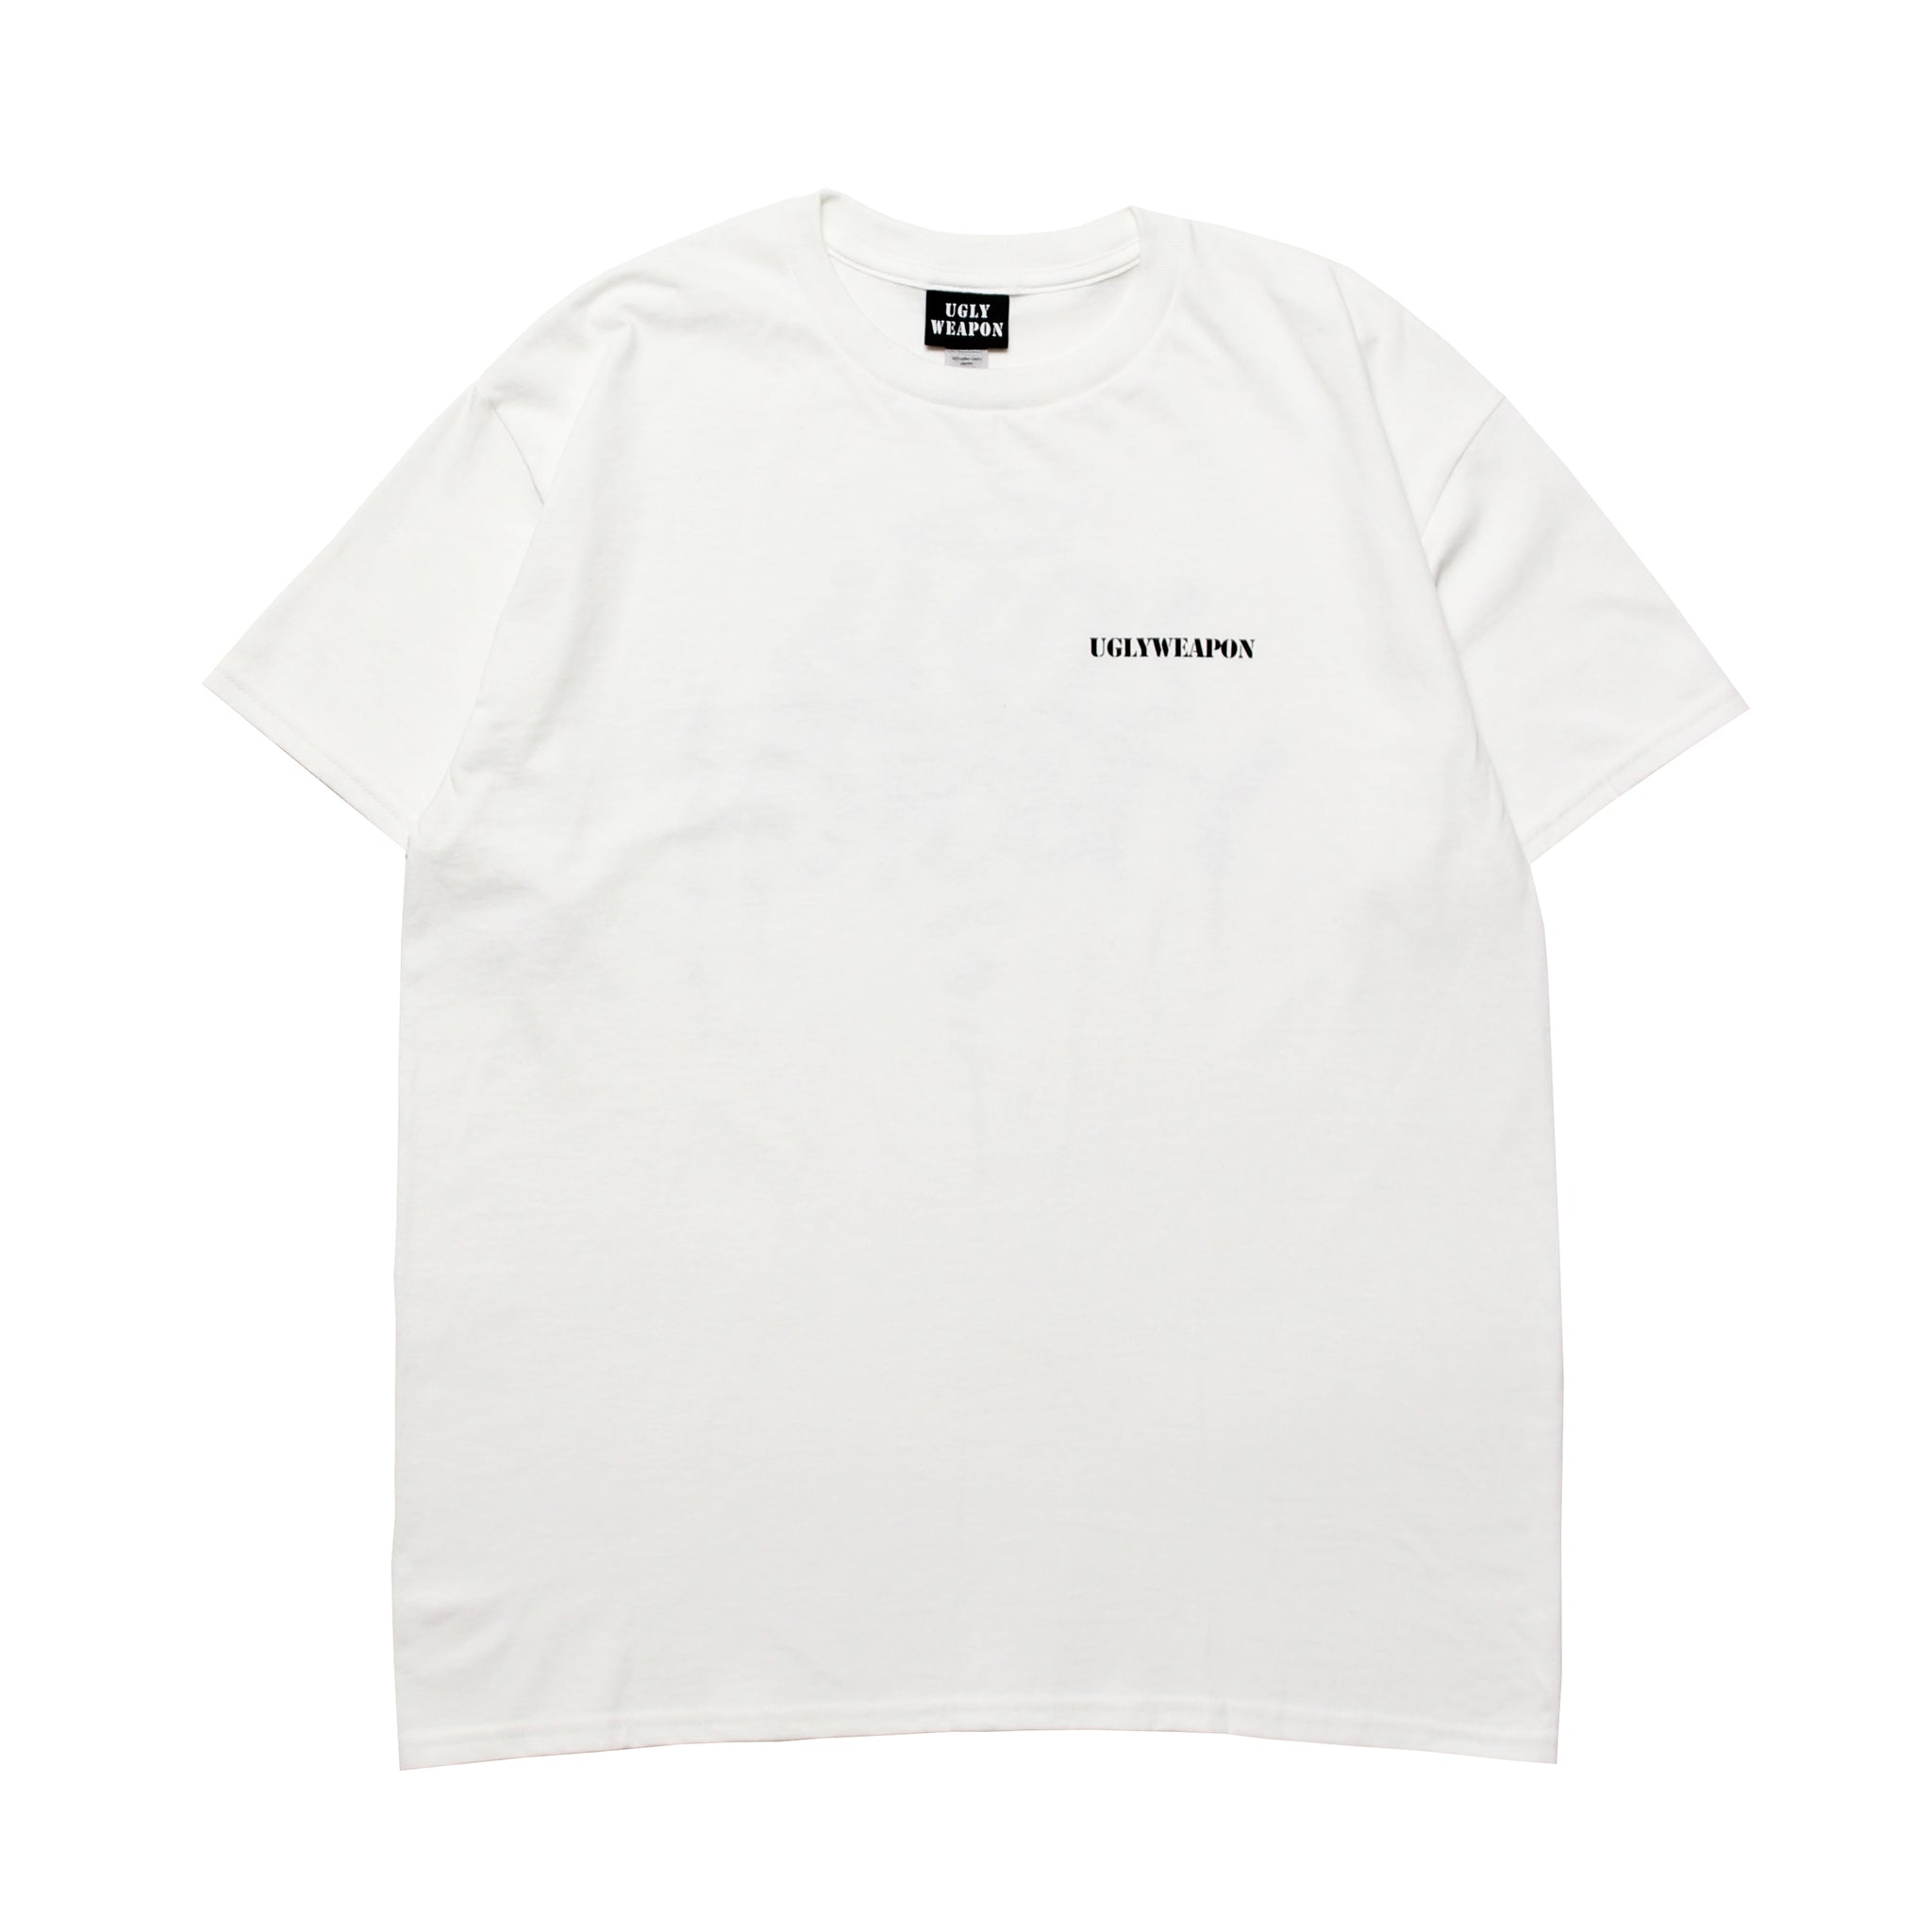 UGLY WEAPON - Tagging Tee "White"